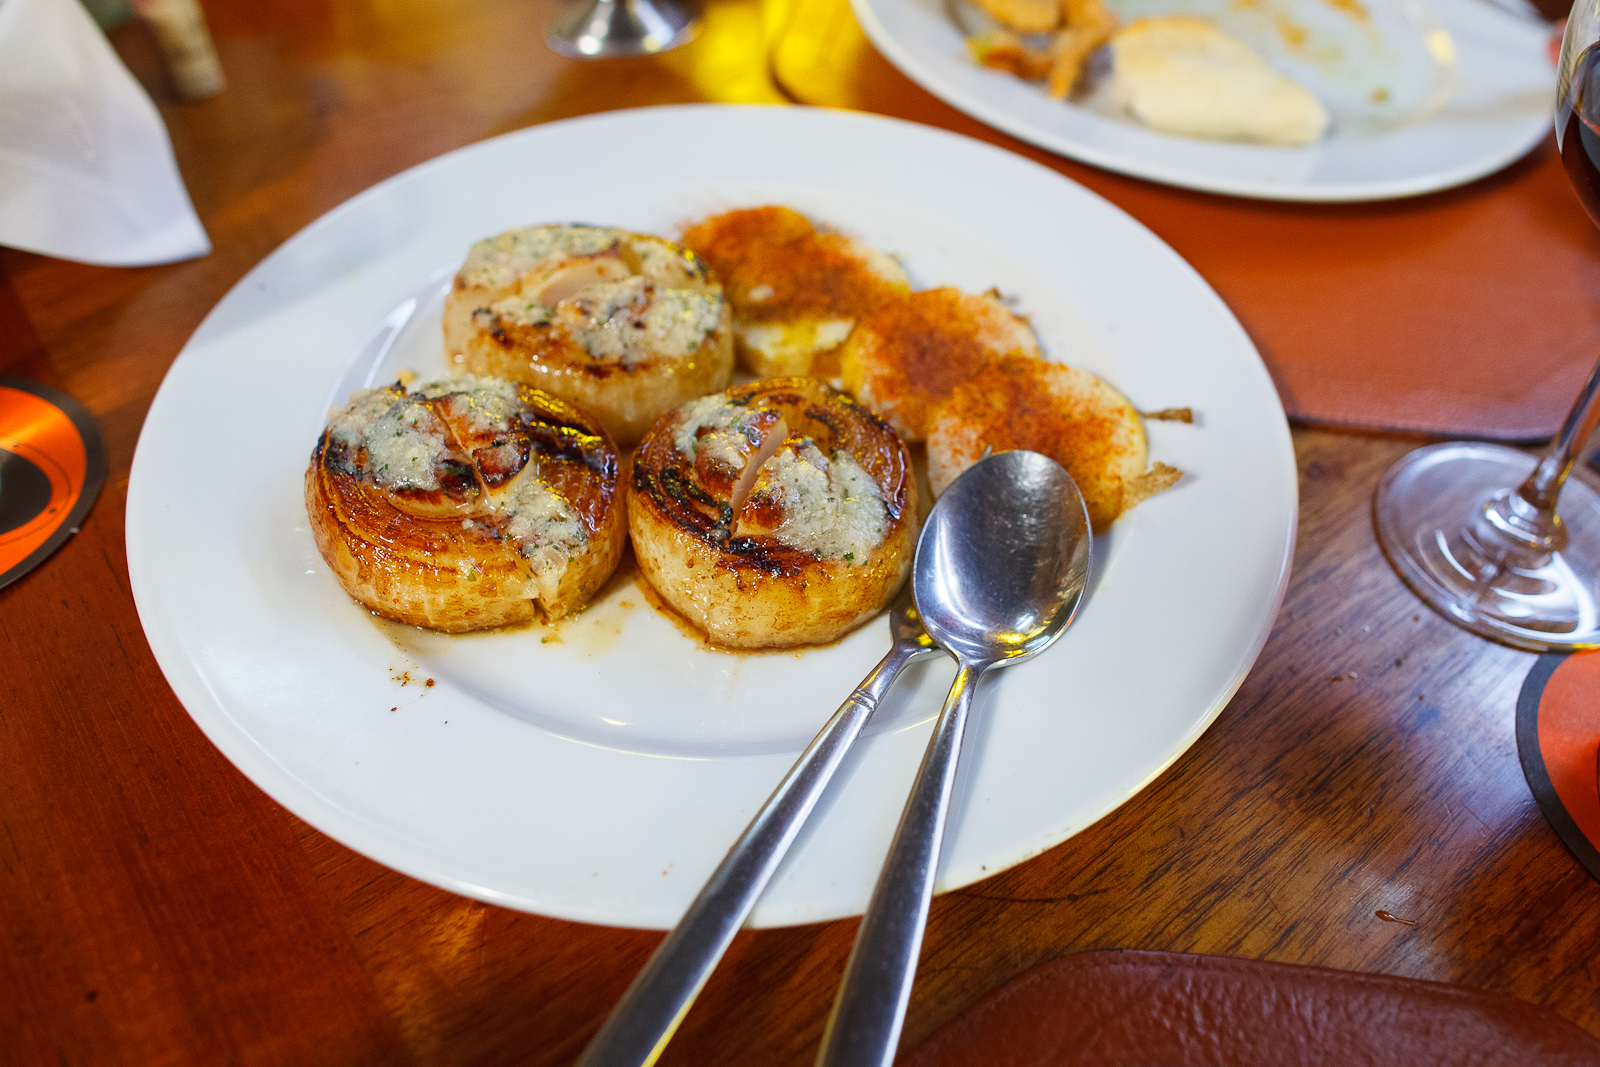 Grilled scallop wrapped in onion, spiced potato slices